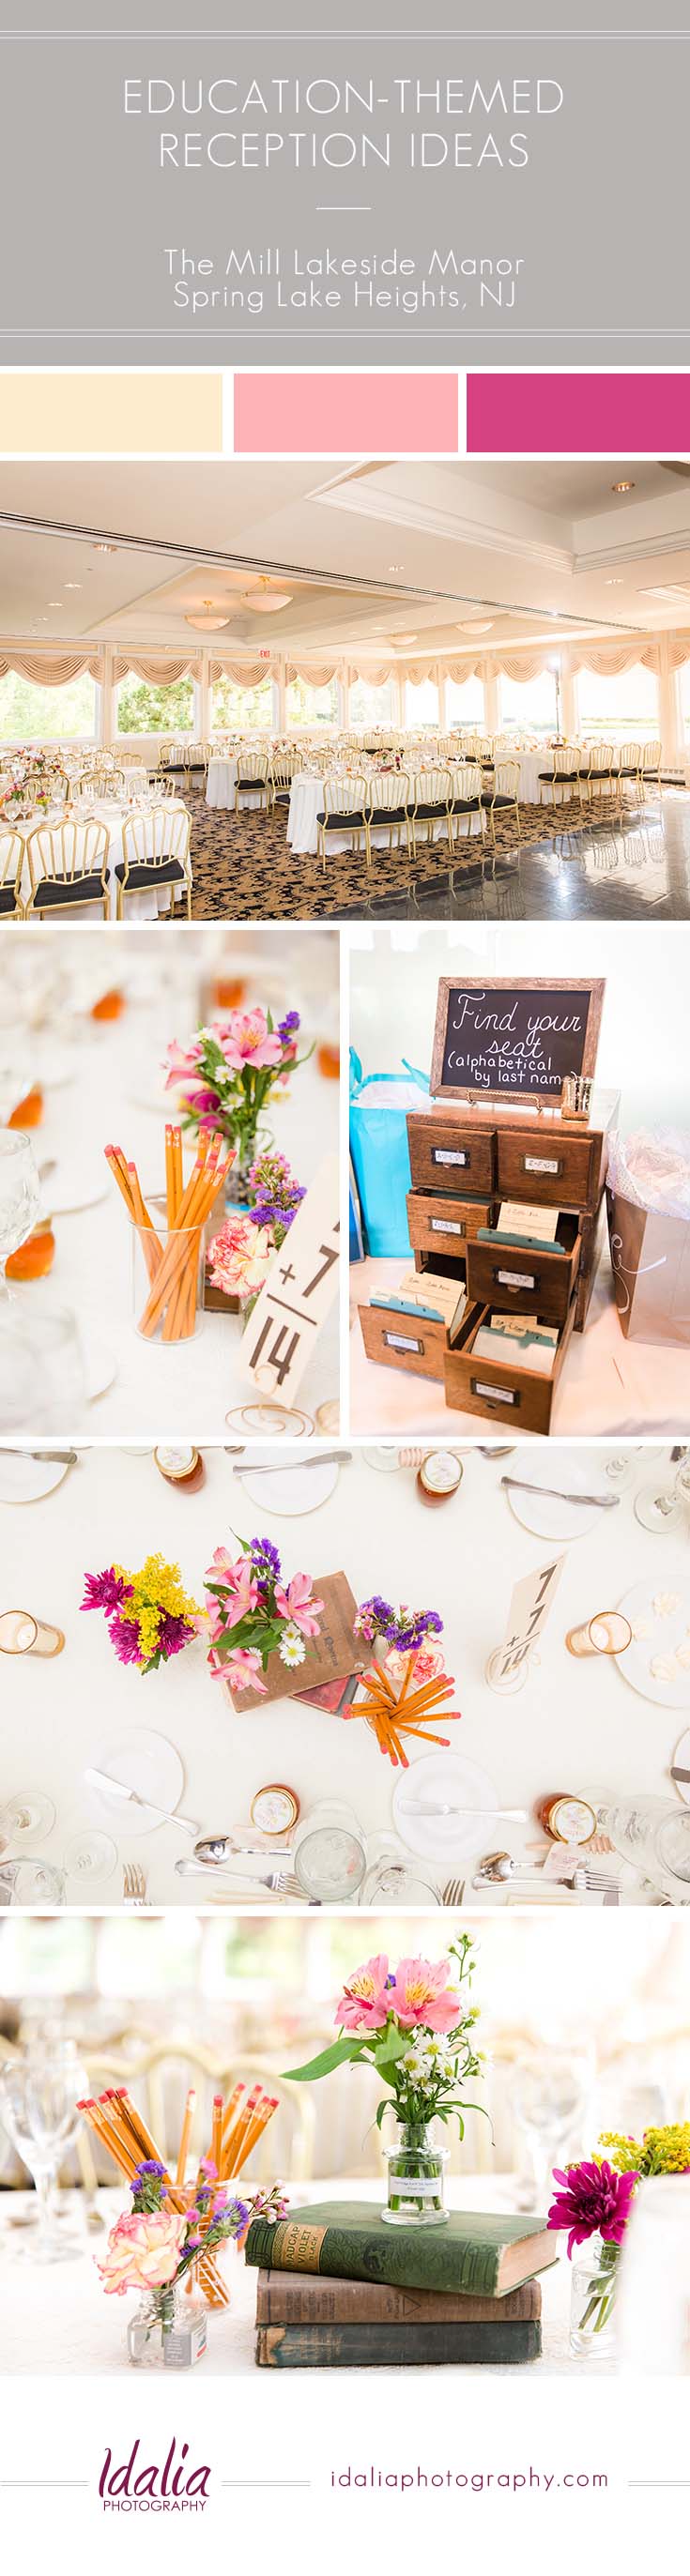 Education-themed wedding reception ideas | The Mill Lakeside Manor Wedding in Spring Lake Heights, NJ